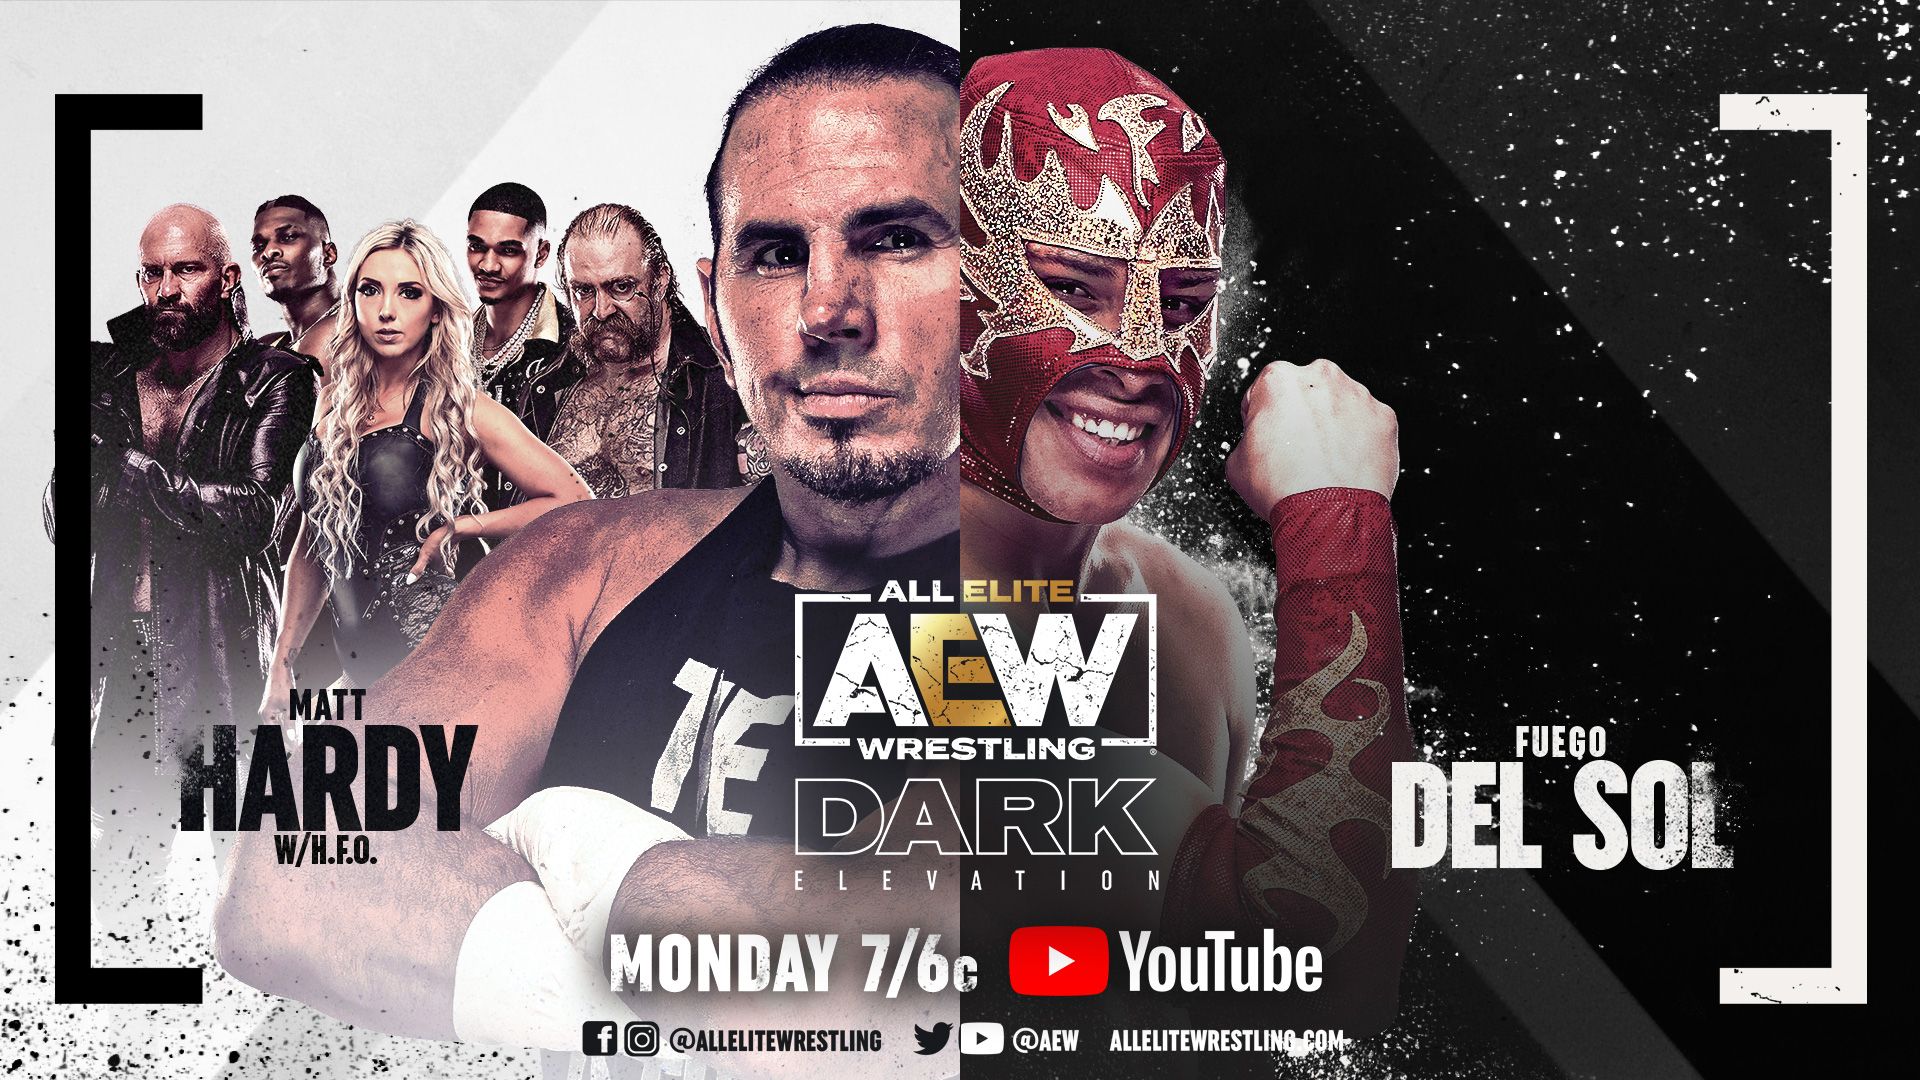 Players are upset at AEW: Fight Forever charging $7 for its new Arcade mode